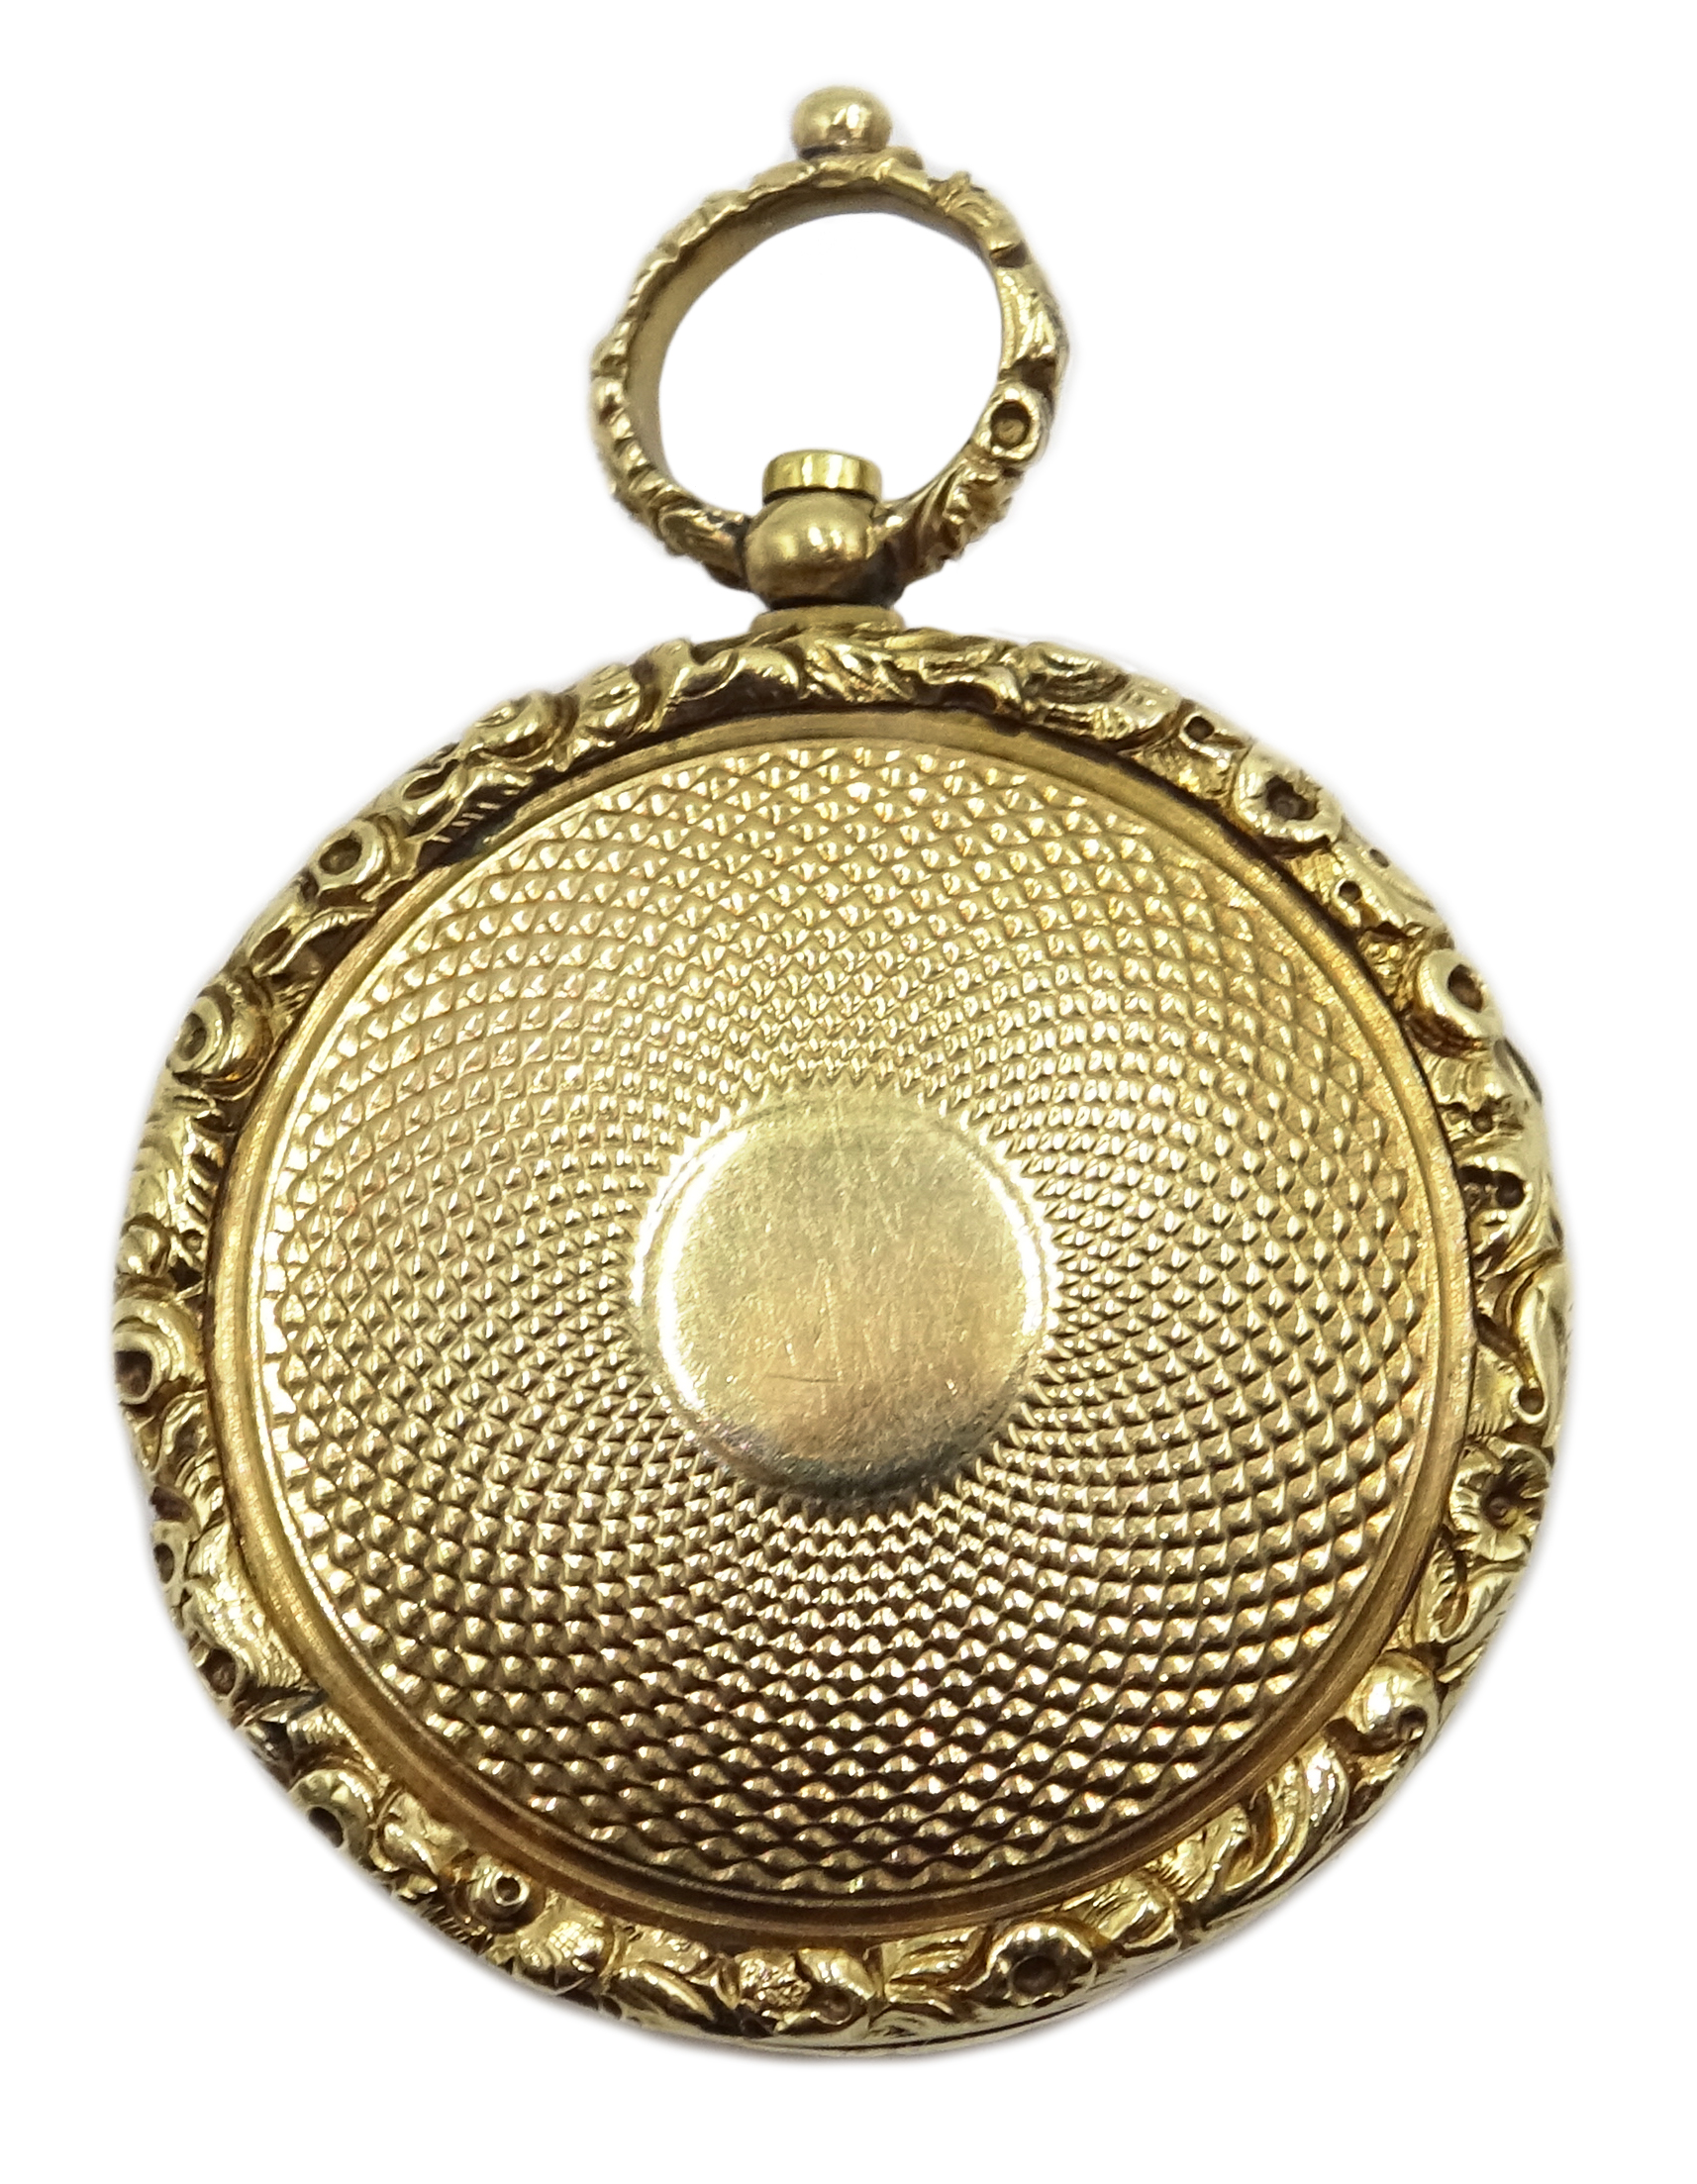 George IV circular gold citrine vinaigrette, the faceted citrine mounted in the lid, - Image 2 of 7